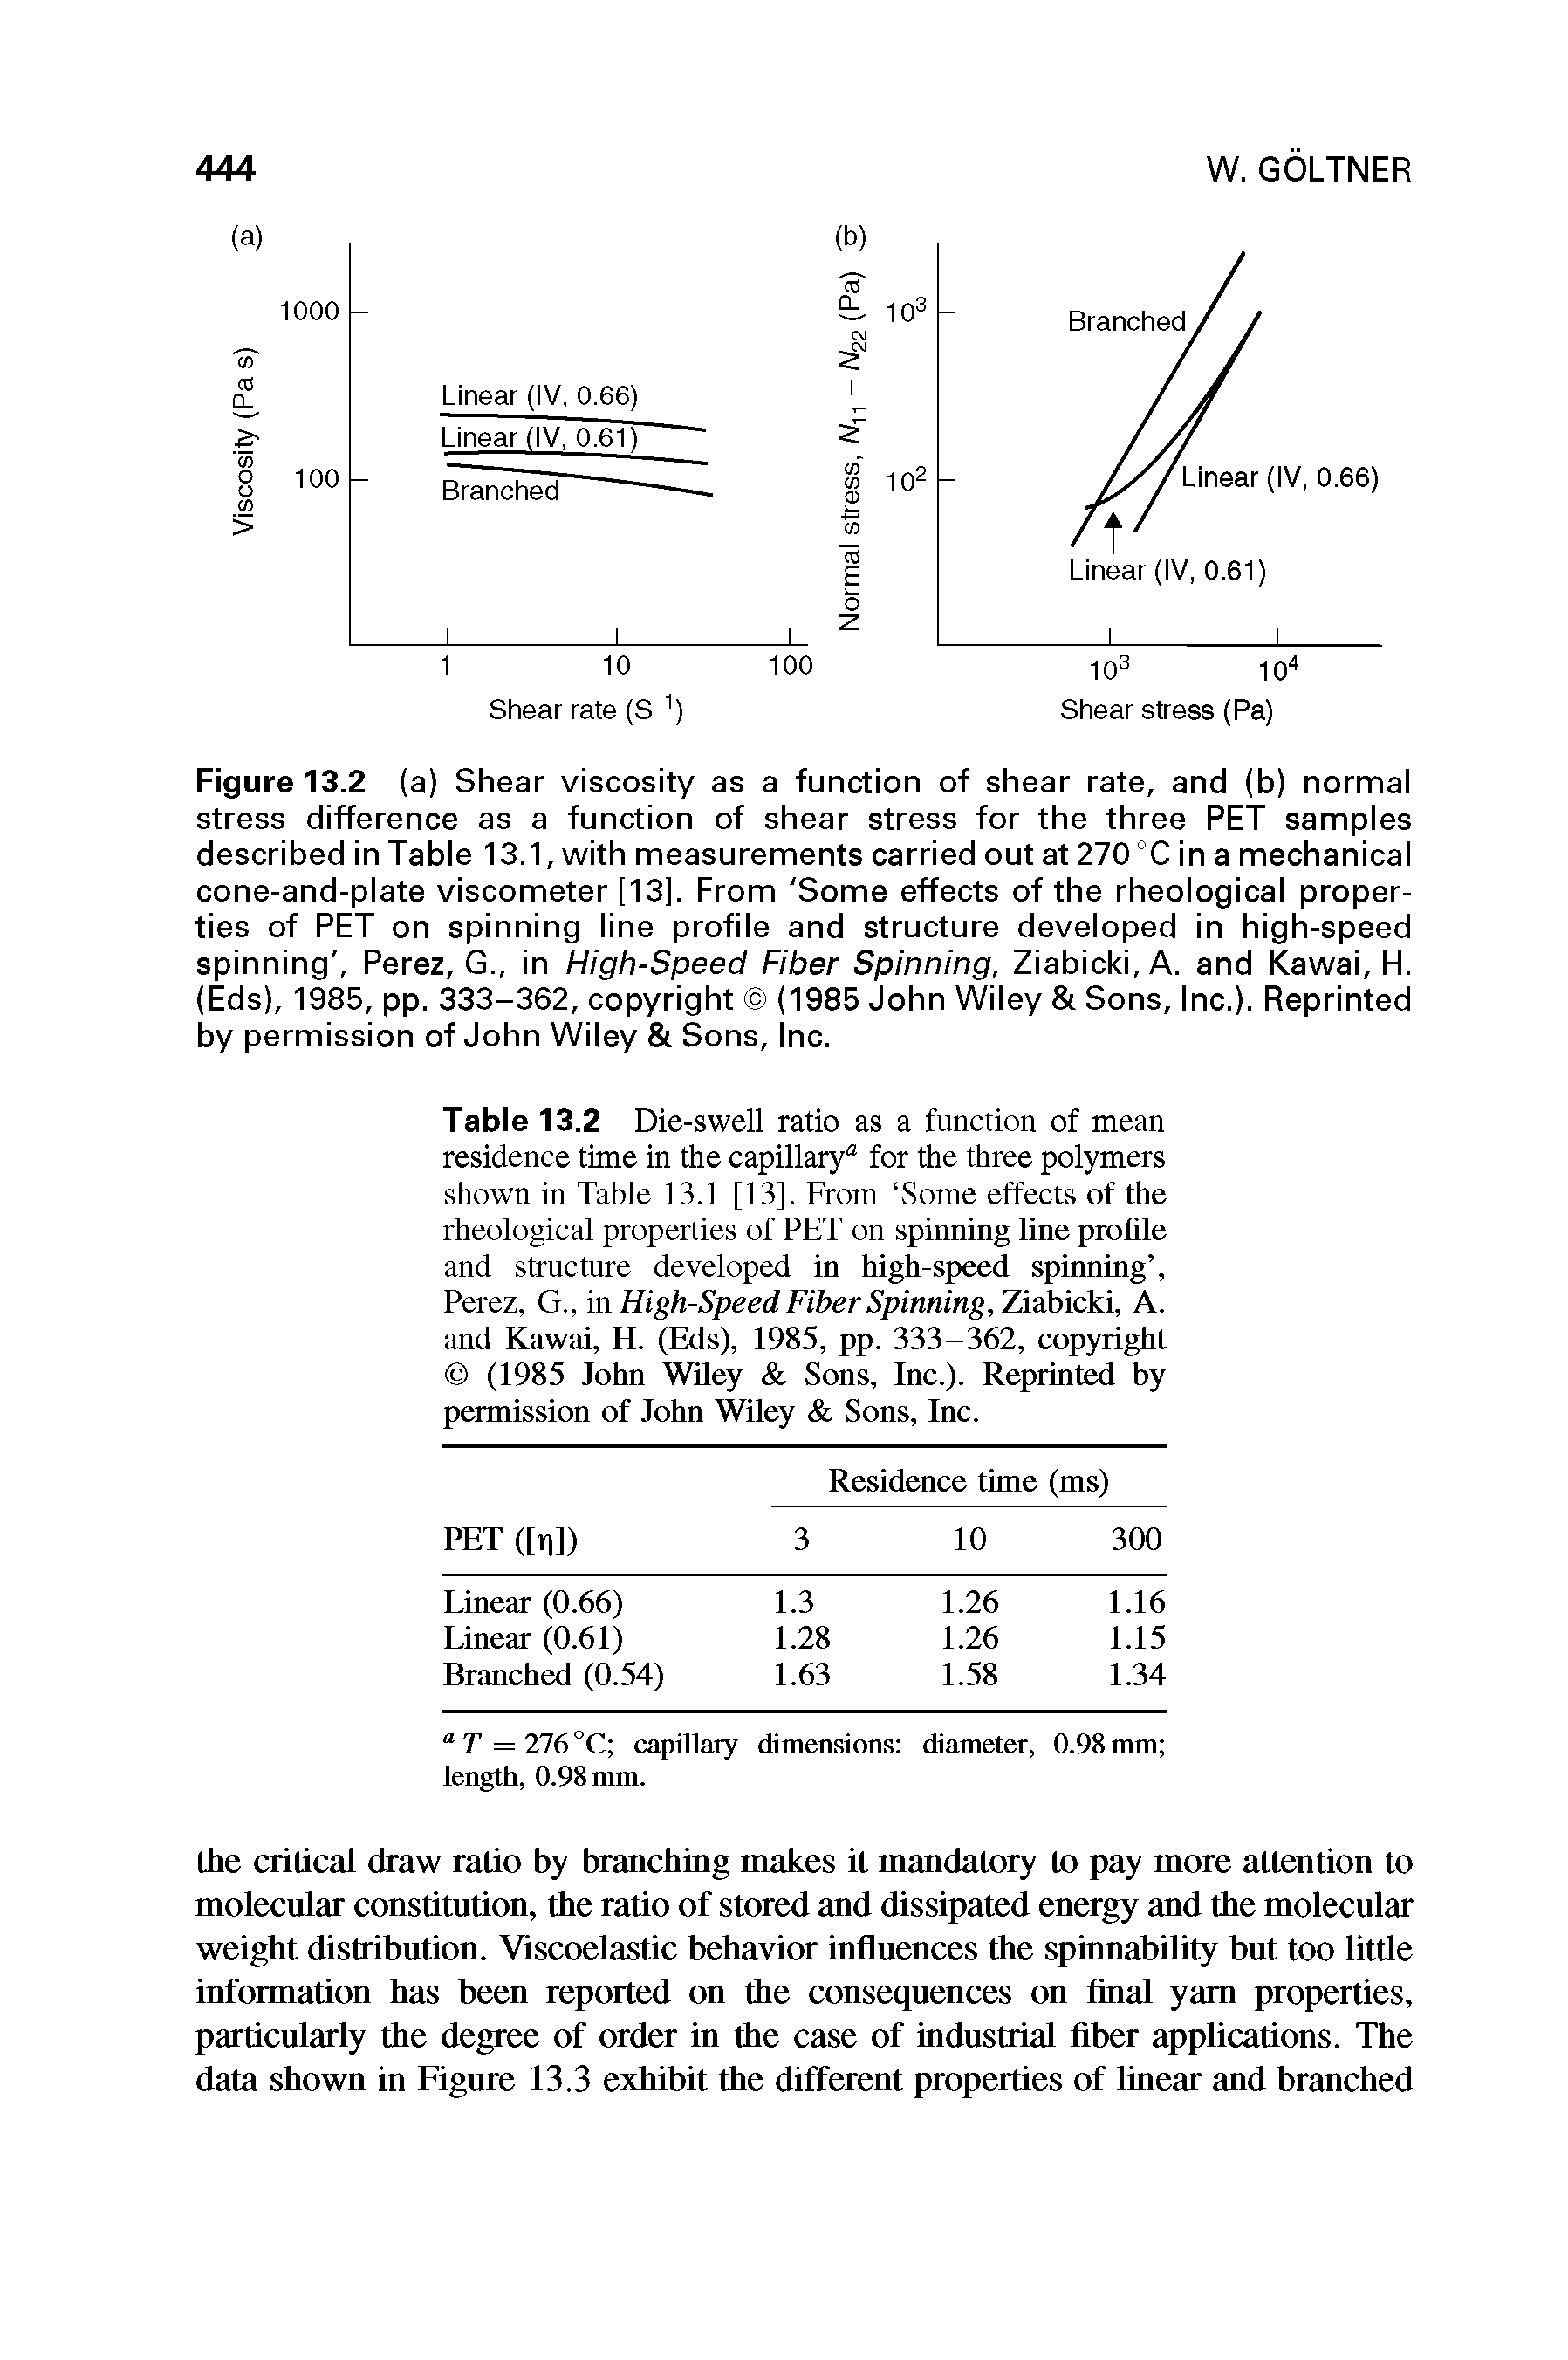 Table 13.2 Die-swell ratio as a function of mean residence time in the capillary0 for the three polymers shown in Table 13.1 [13]. From Some effects of the rheological properties of PET on spinning line profile and structure developed in high-speed spinning , Perez, G., in High-Speed Fiber Spinning, Ziabicki, A. and Kawai, H. (Eds), 1985, pp. 333-362, copyright (1985 John Wiley Sons, Inc.). Reprinted by permission of John Wiley Sons, Inc.